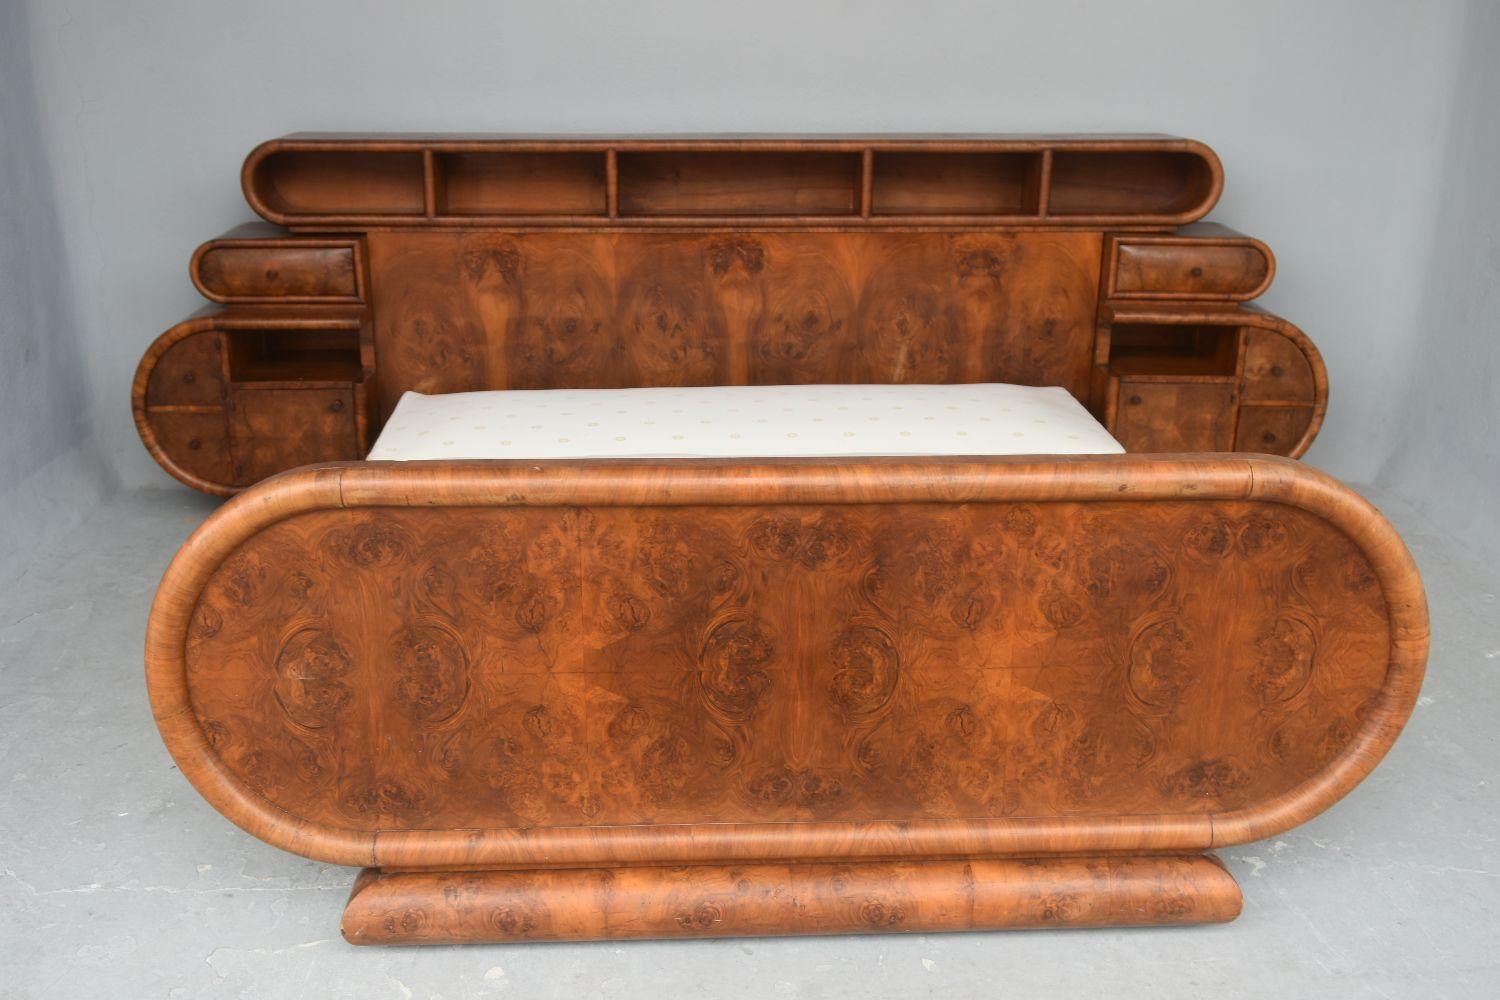 1930s Art Deco Hollywood Bed in Walnut Burl Veneer with its Curved 9